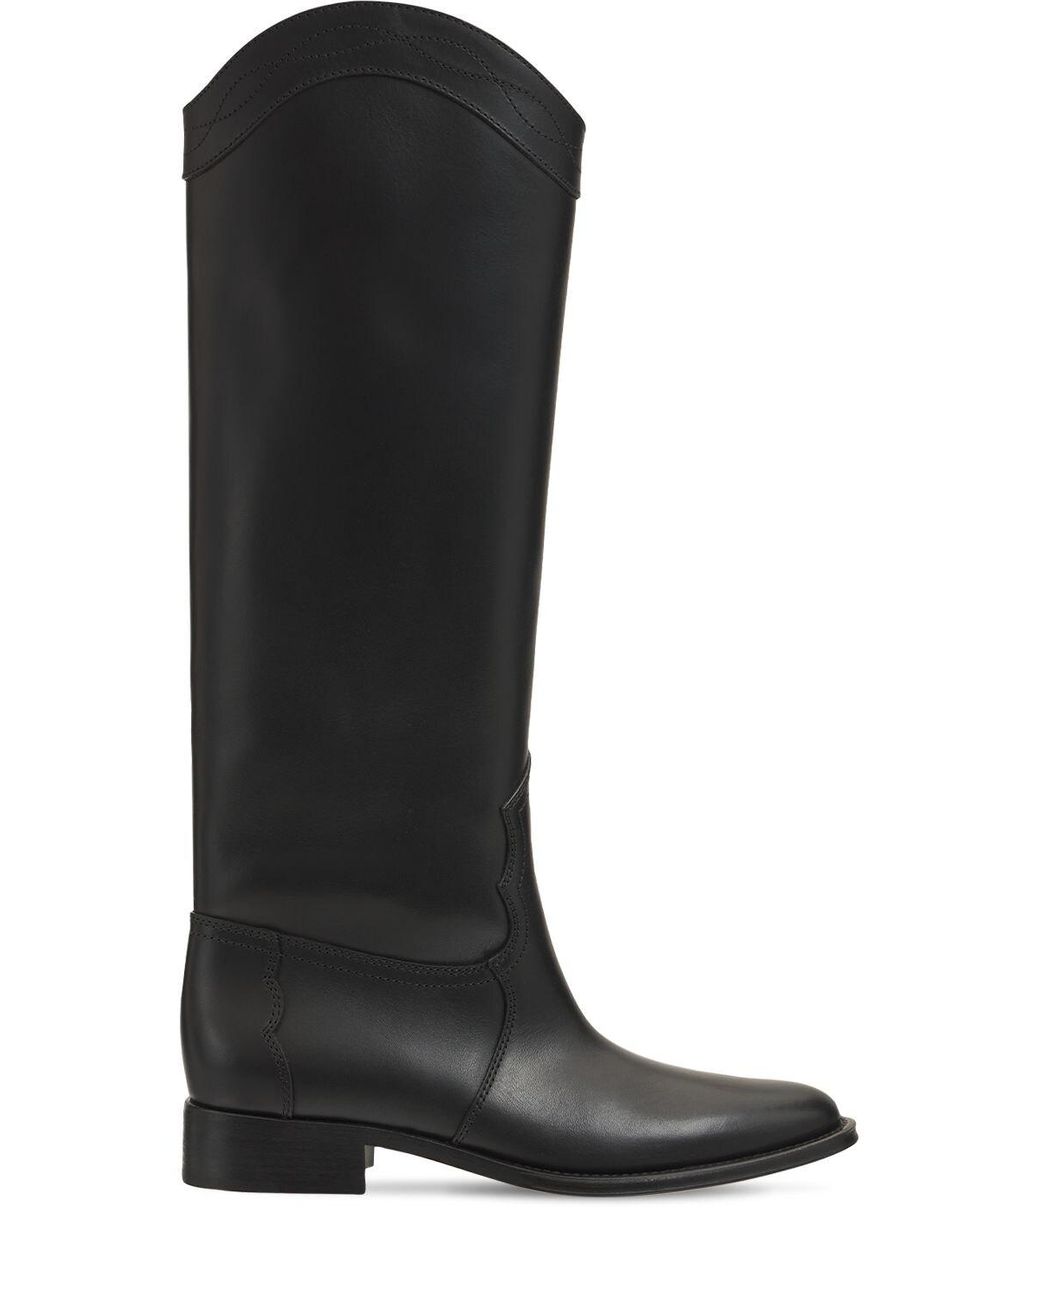 Saint Laurent 30mm Kate Leather Tall Boots in Black | Lyst Canada